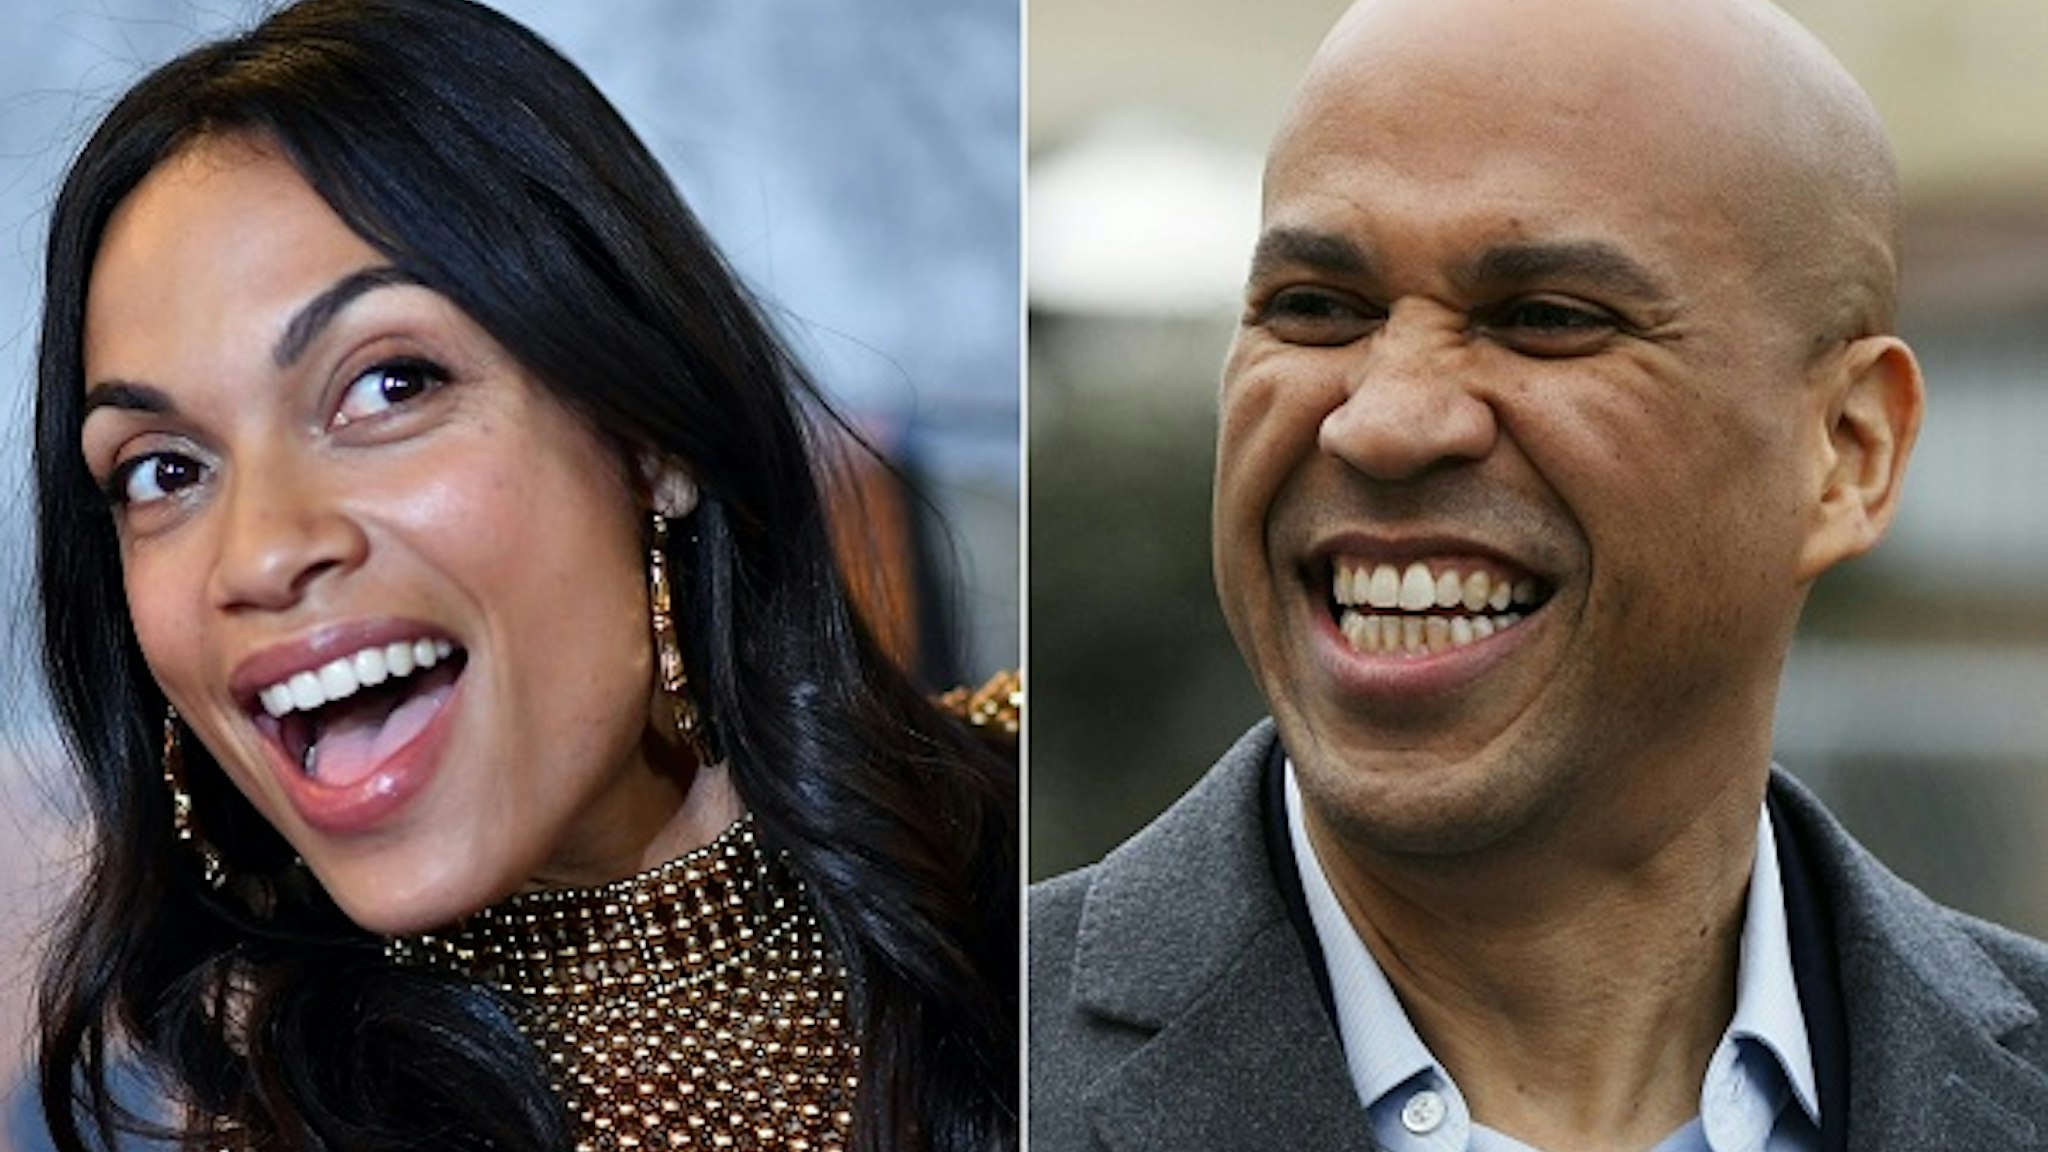 (COMBO) This combination of pictures created on March 14, 2019 shows US actress Rosario Dawson attending the Netflix Original Series Marvel's Luke Cage Season 2 New York City Premiere on June 21, 2018 in New York City, and US Senator Cory Booker (D-NJ) arrives for a press conference announcing his run for US president in 2020, on February 1, 2019, outside his home in Newark, New Jersey. - Senator Cory Booker, one of more than a dozen Democrats seeking the party's tip to run for president in 2020, is in a relationship with star Latina actress Rosario Dawson, Dawson confirmed on March 14, 2019. While Booker has long been intensely private about his relationships, Dawson confirmed it on camera to TMZ as she walked through Washington's national Airport.Were the rumors true? asked the TMZ reporter."Yes. Very much so," Dawson replied, adding: "So far so wonderful, he's a wonderful human being. It's good to spend some time together when we can."